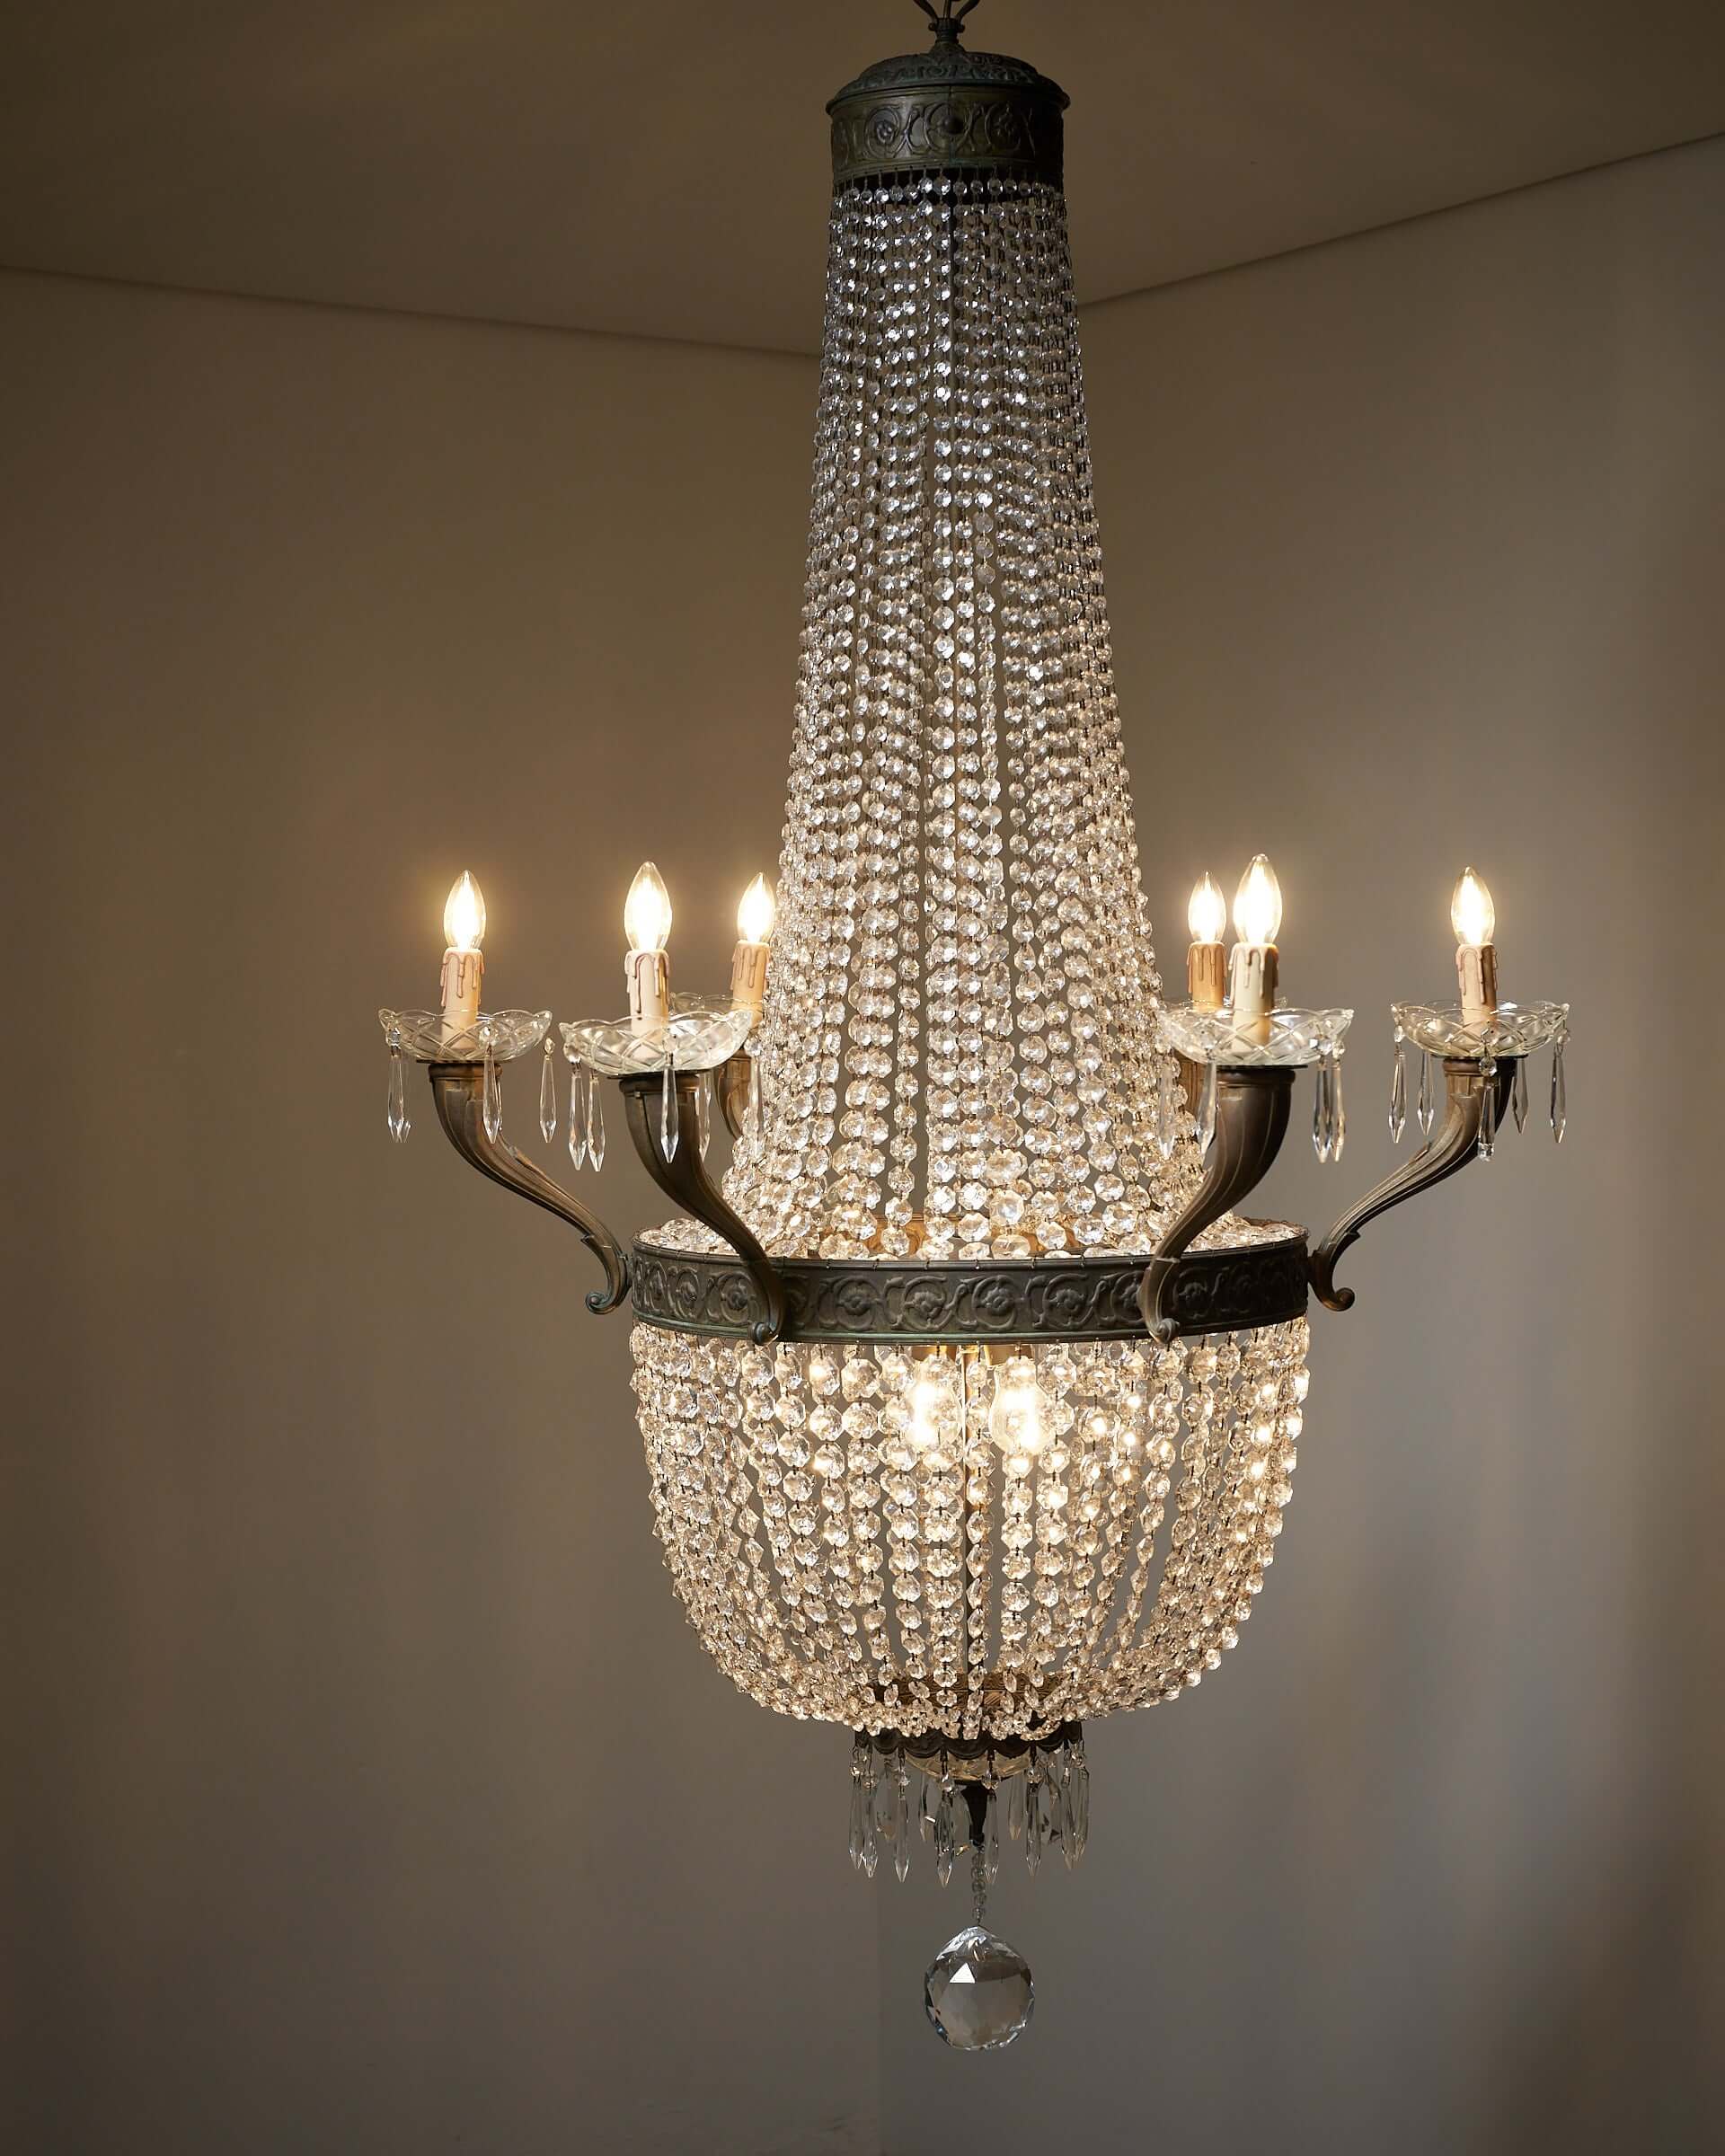 Large 'sac-à-perles' Chandelier with Arms